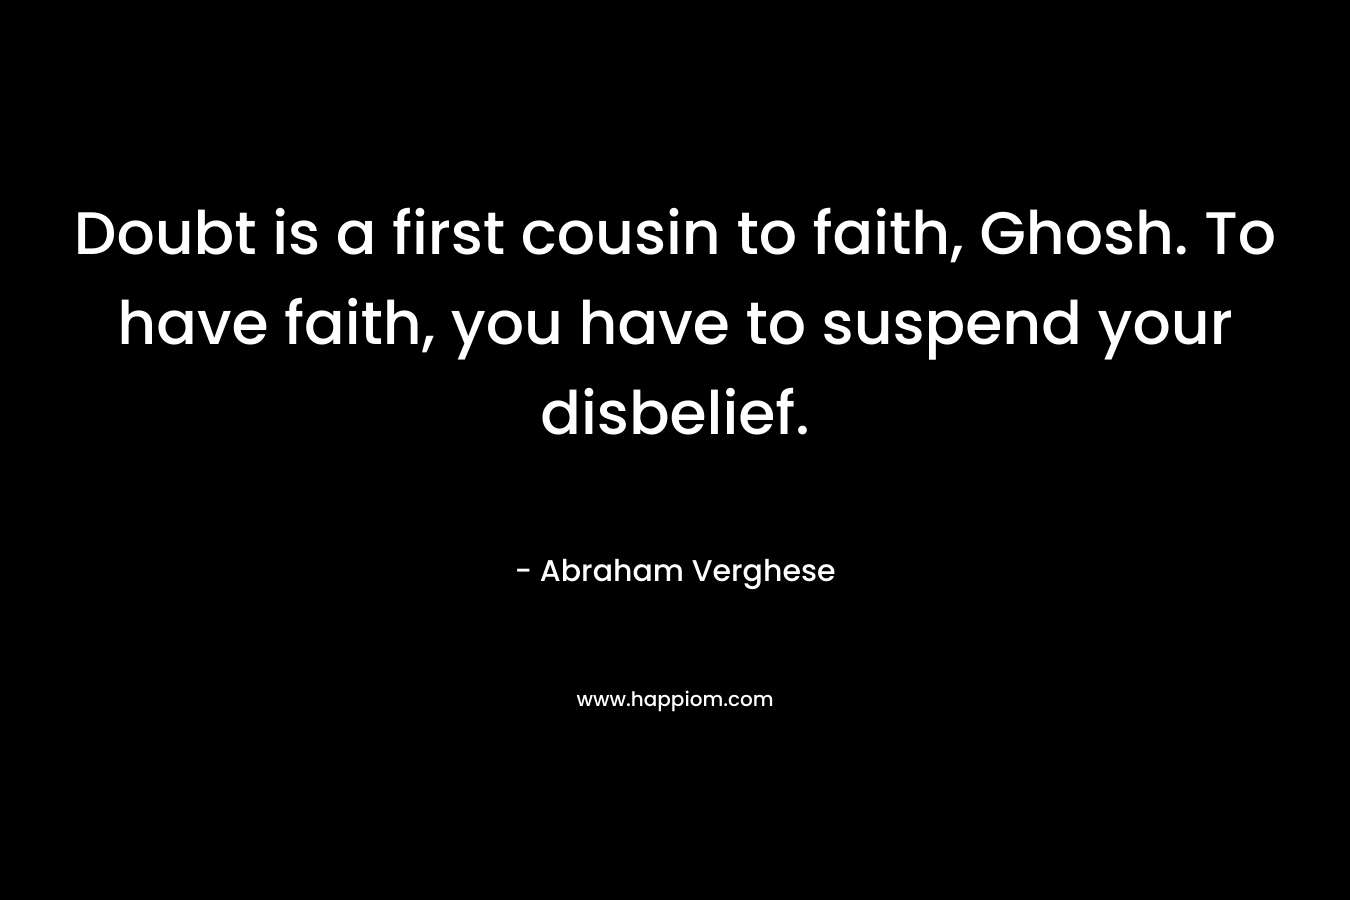 Doubt is a first cousin to faith, Ghosh. To have faith, you have to suspend your disbelief.